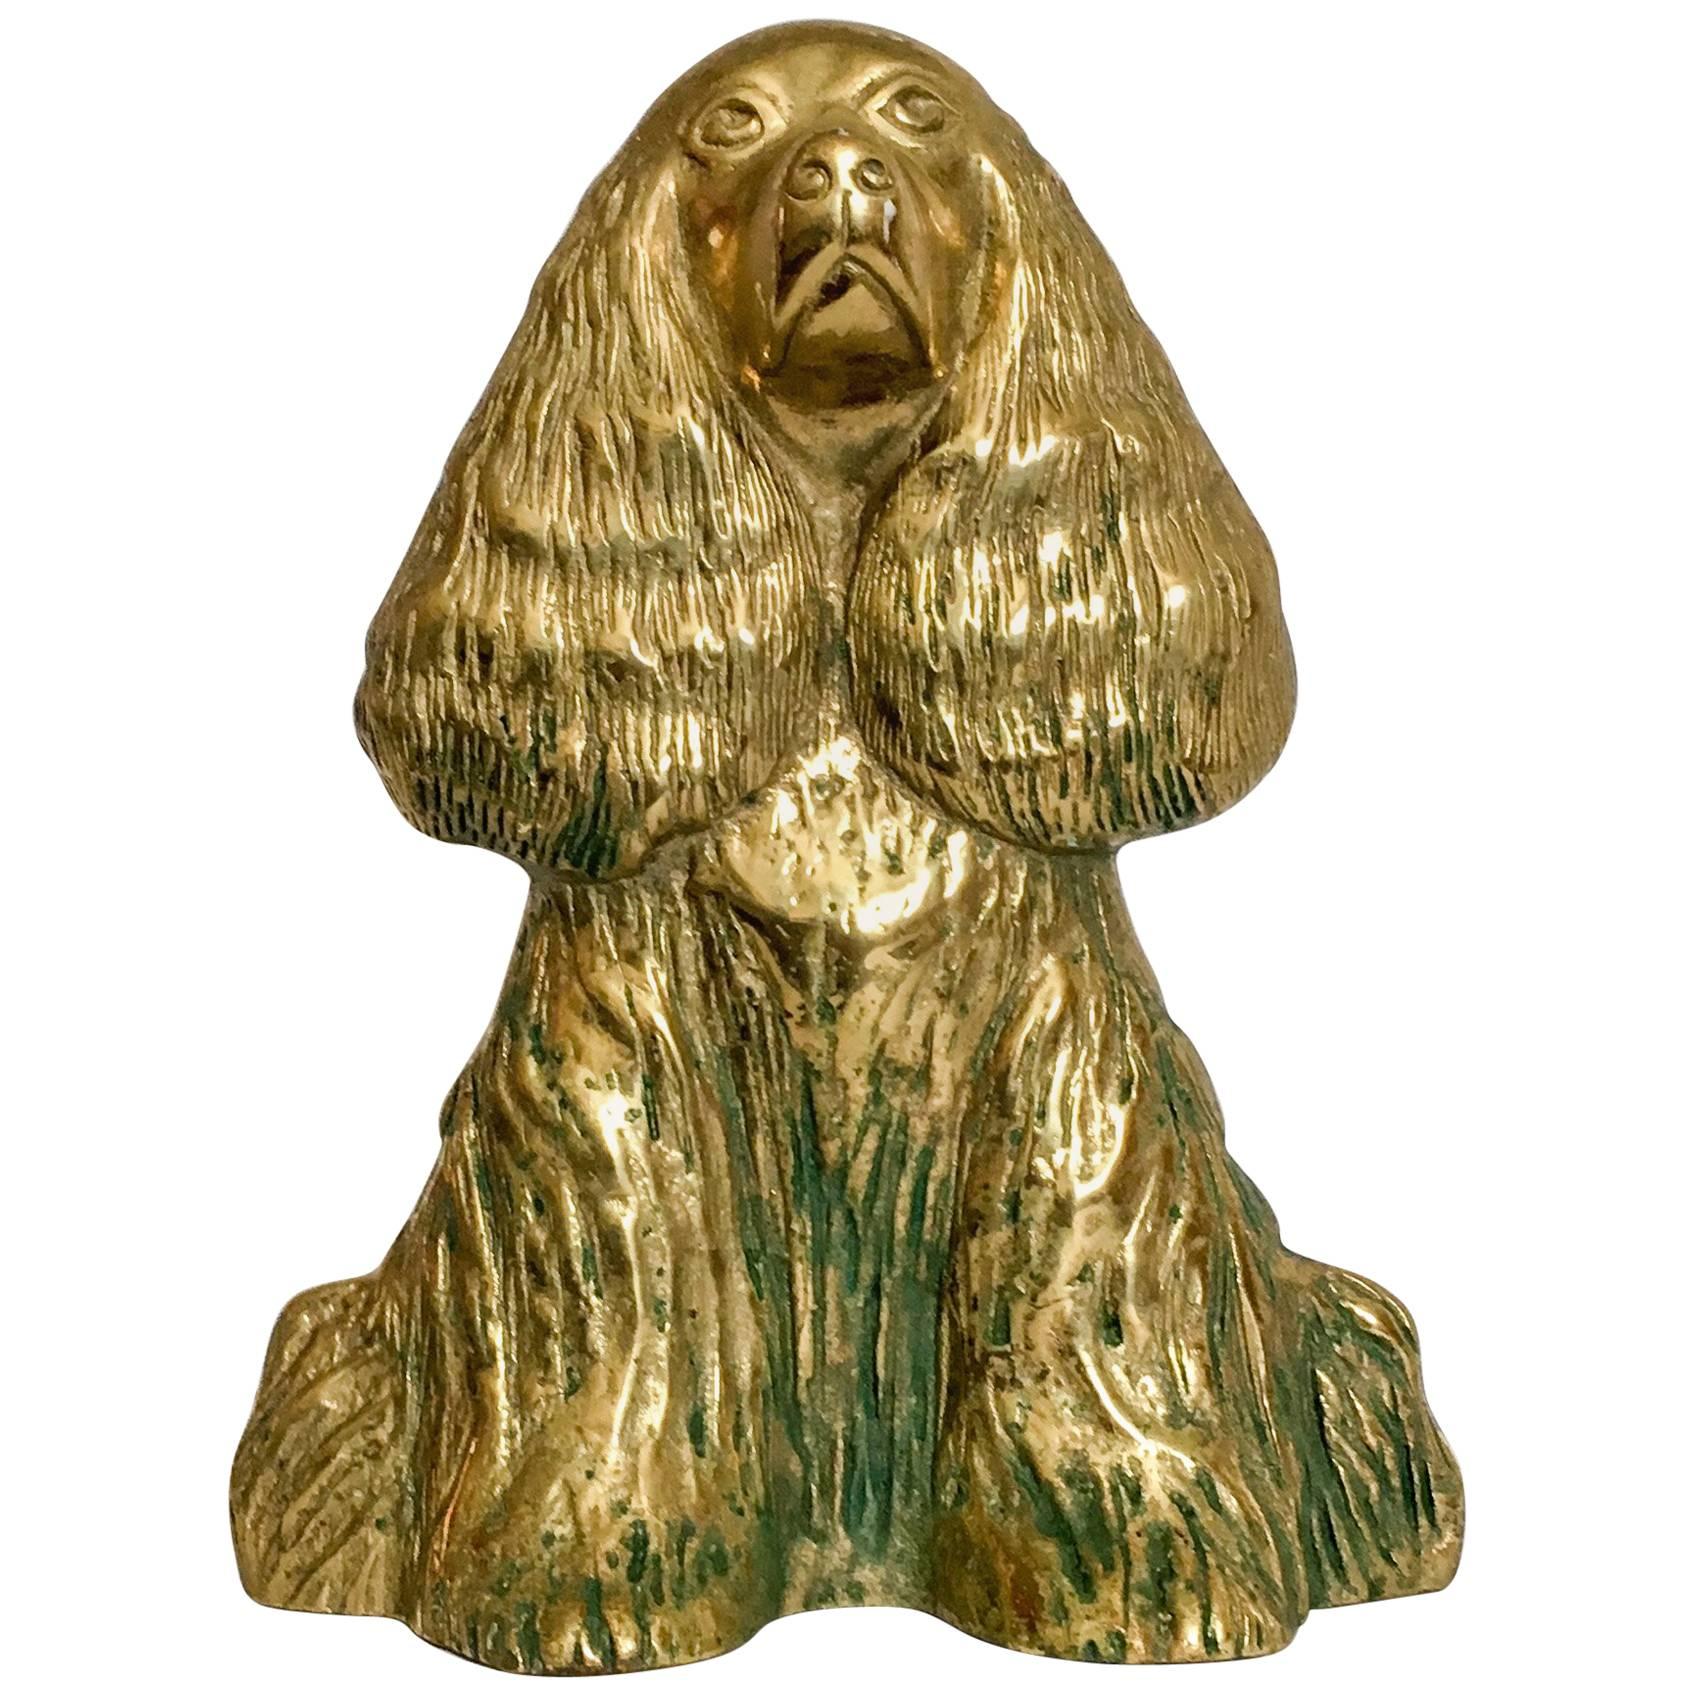 1940s English Spaniel Dog Doorstop by Virginia Metalcrafters